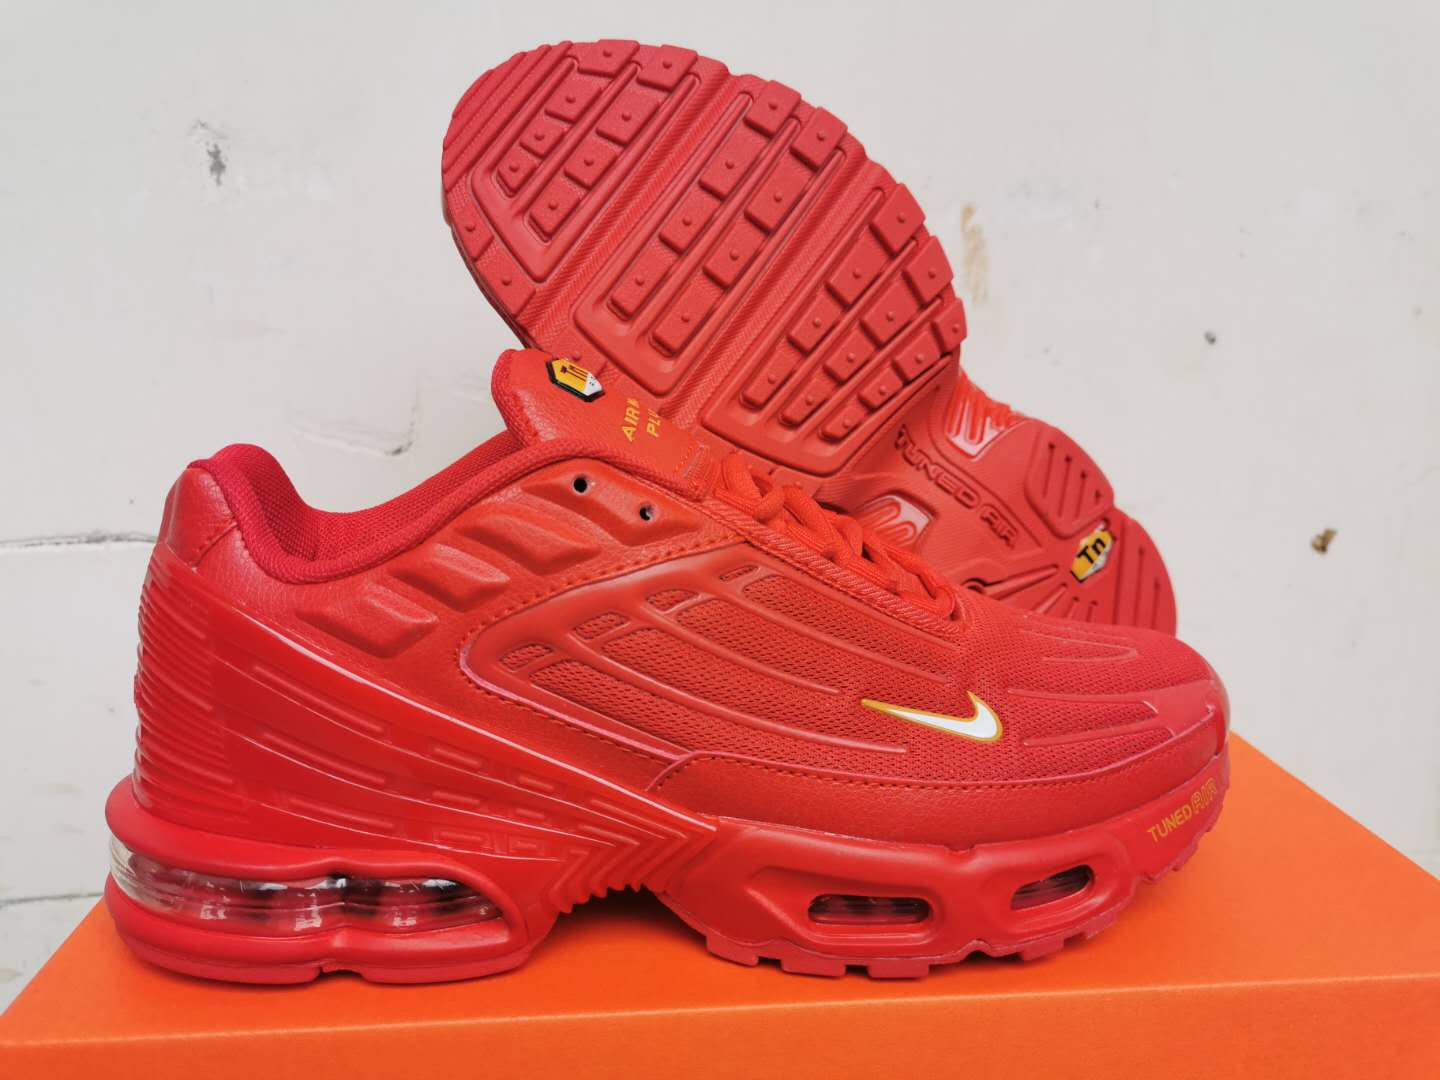 Men's Hot sale Running weapon Air Max TN Shoes 054